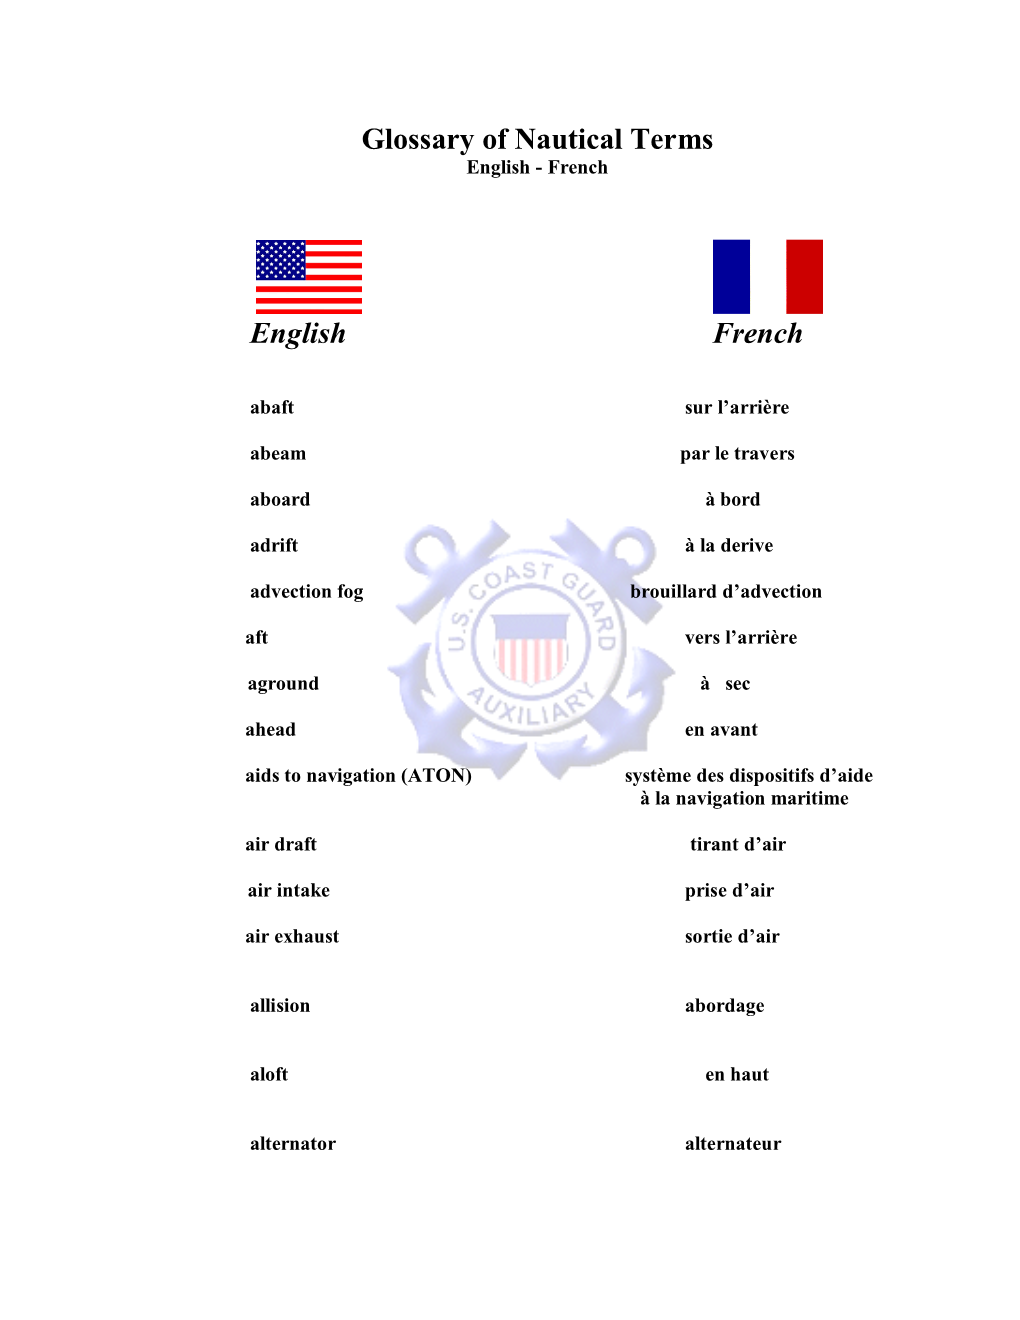 Glossary of Nautical Terms English - French